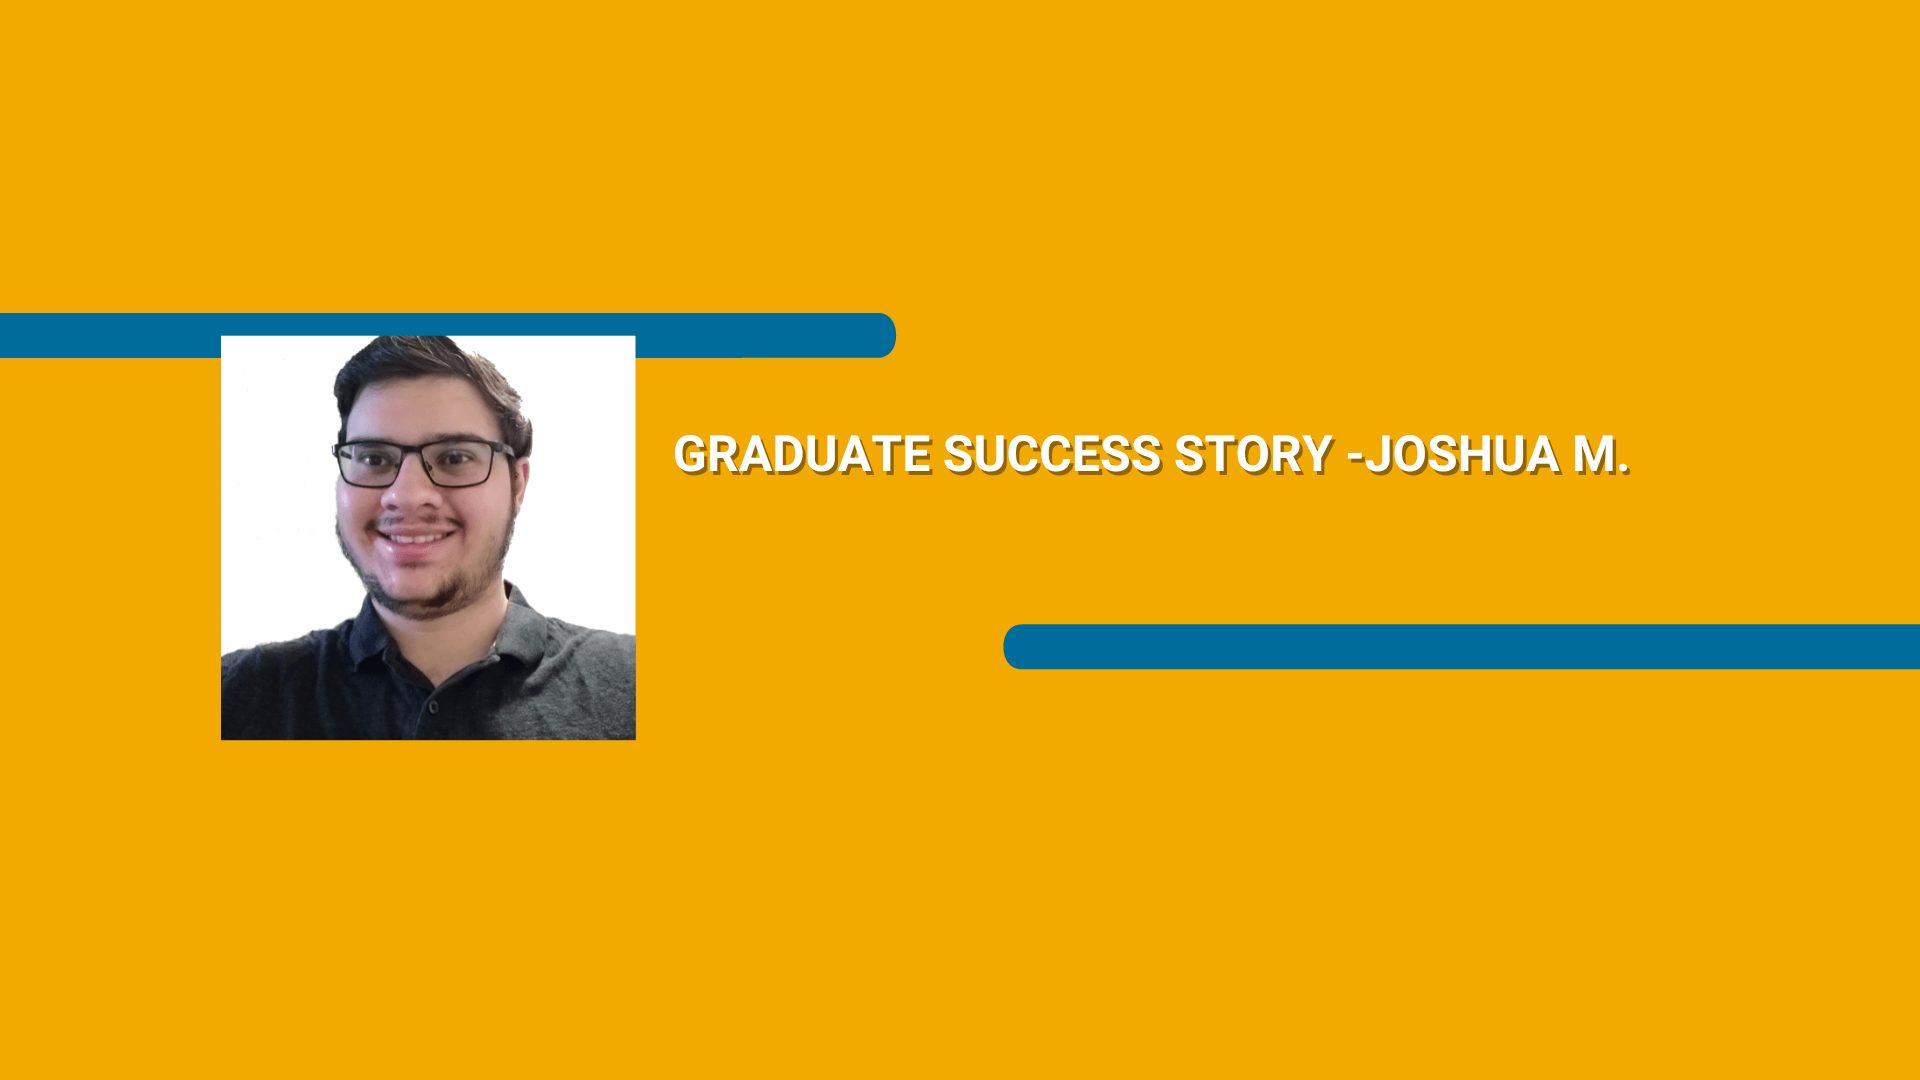 Orange rectangle with a picture of a man wearing a polo shirt and Graduate Success Story - Joshua M. text in white font